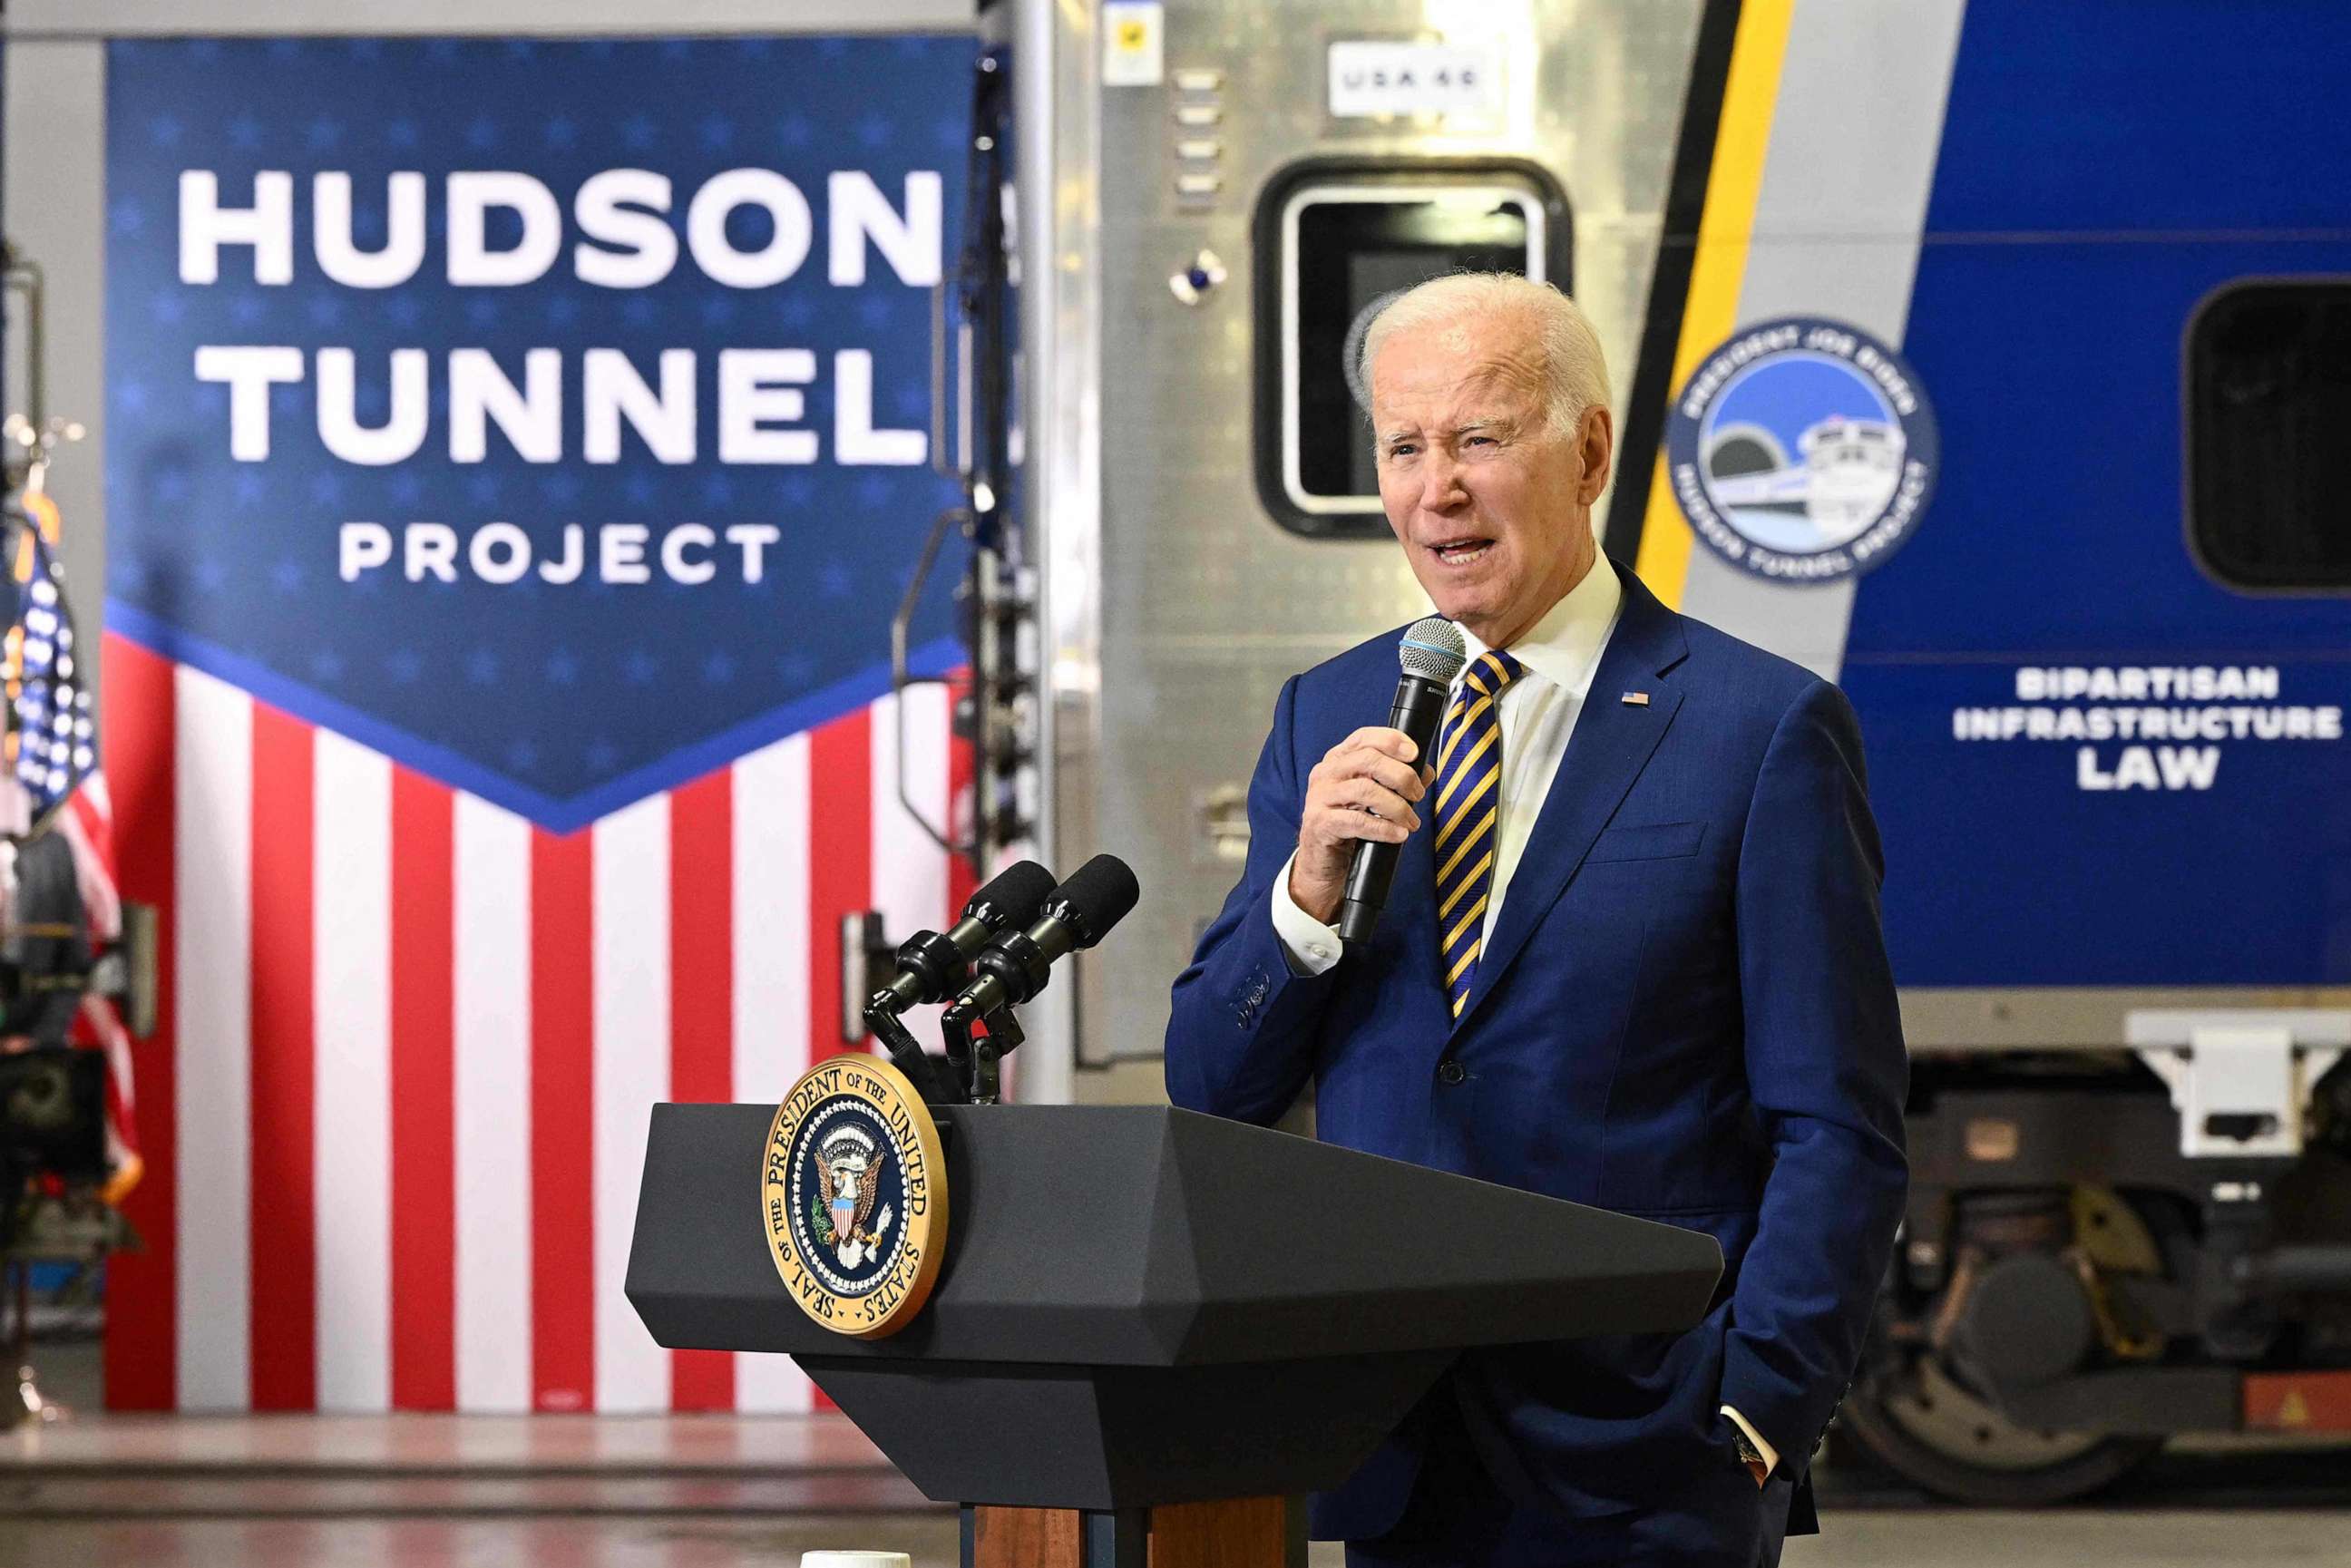 PHOTO: President Joe Biden speaks about how the Bipartisan Infrastructure Law will provide funding for the Hudson River Tunnel project, at the West Side Rail Yard in New York, on Jan. 31, 2023.